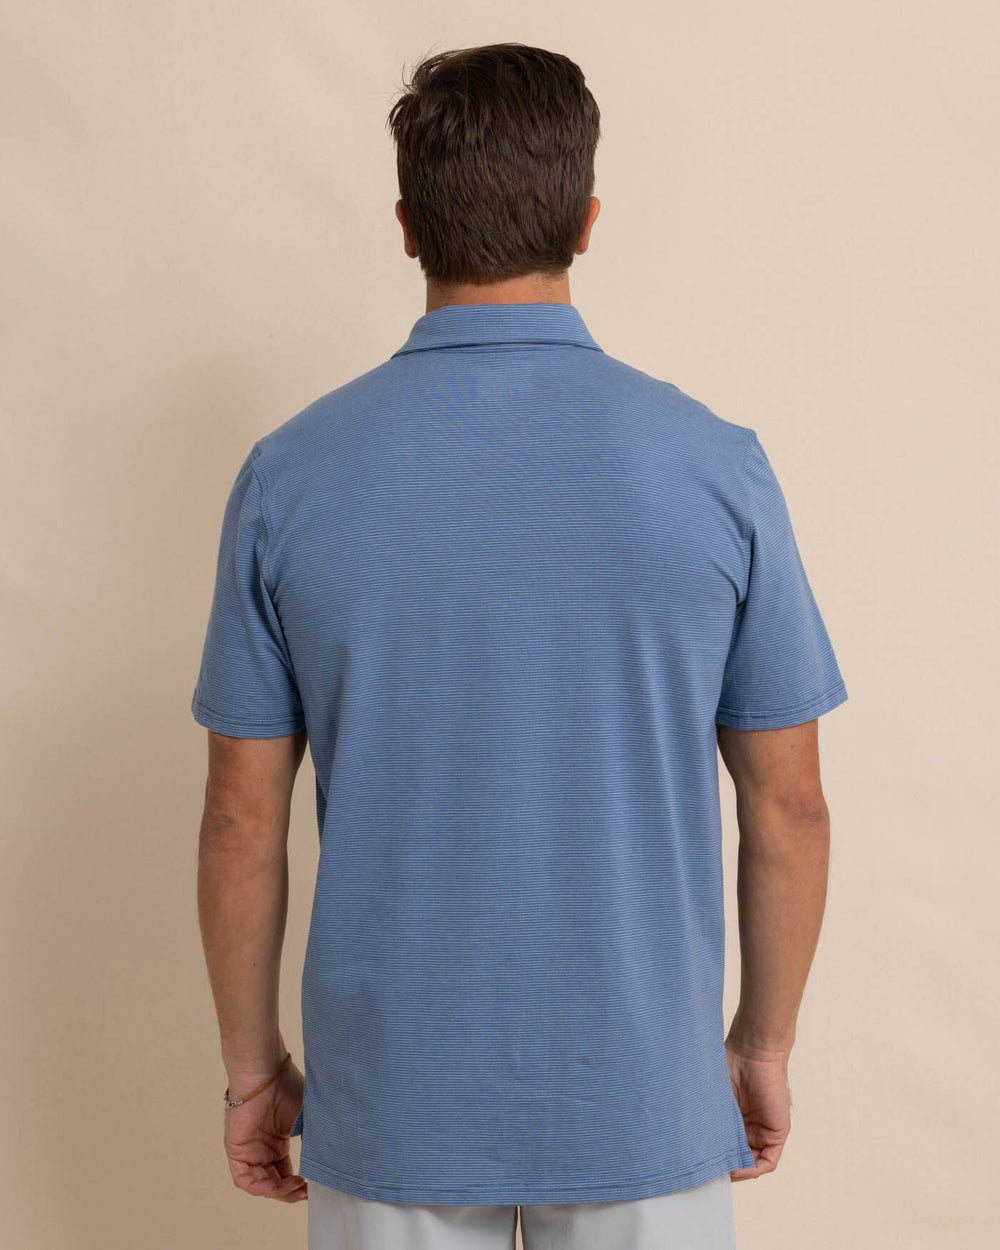 The back view of the Southern Tide The Seaport Davenport Stripe Polo by Southern Tide - Coronet Blue